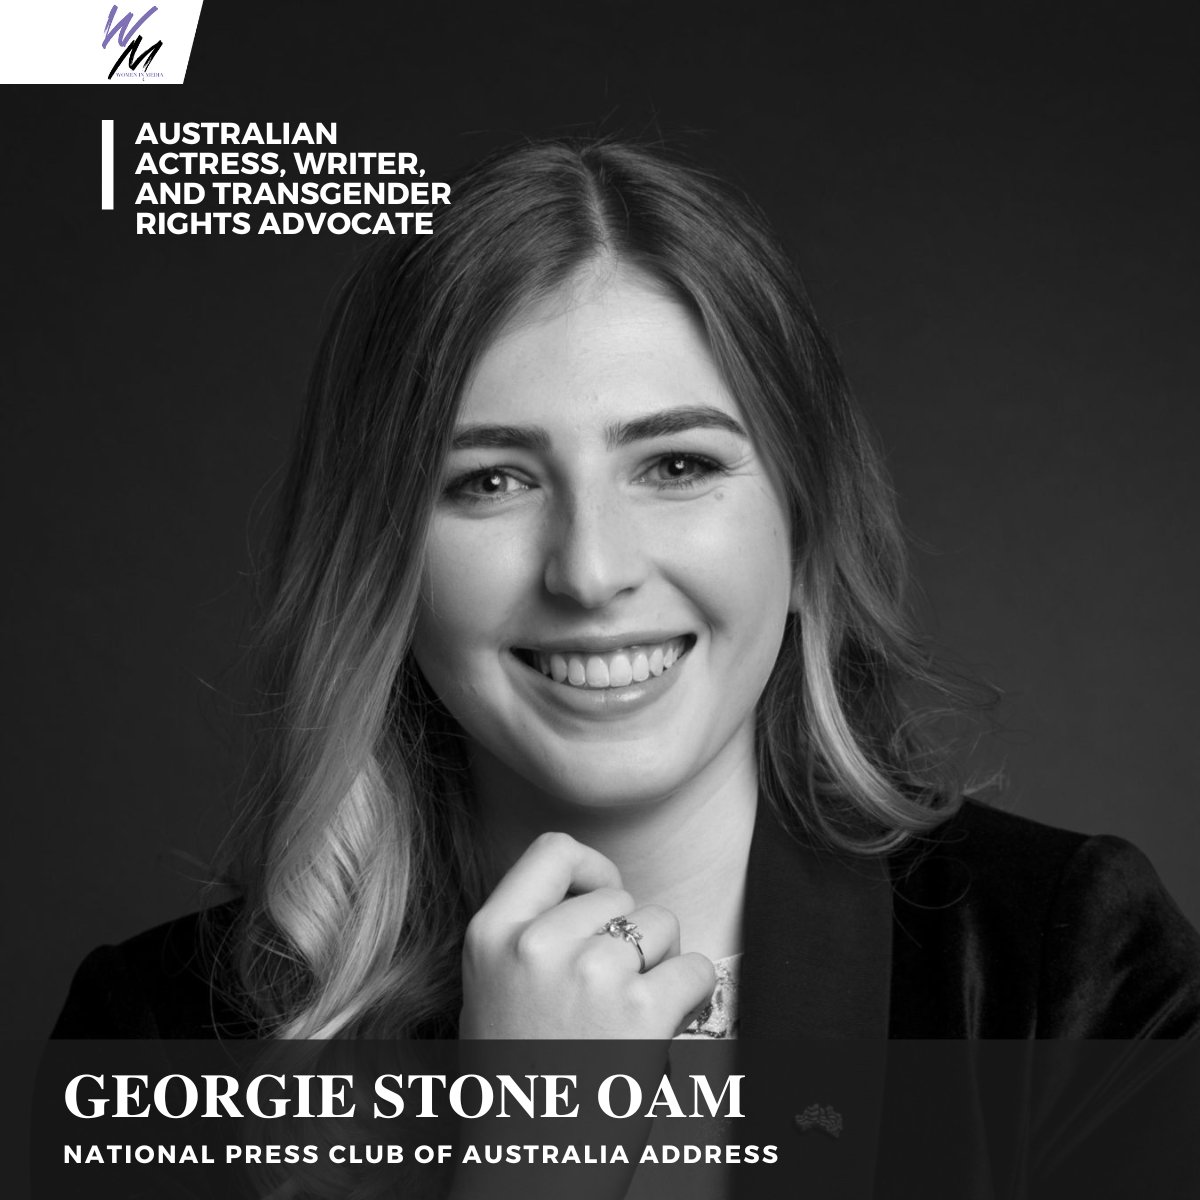 UPCOMING: @georgiestone16 OAM, Australian actress, writer and transgender rights advocate, will make her Address to the National Press Club of Australia. This Address is in partnership with @WIM_Aus. Purchase your tickets now!